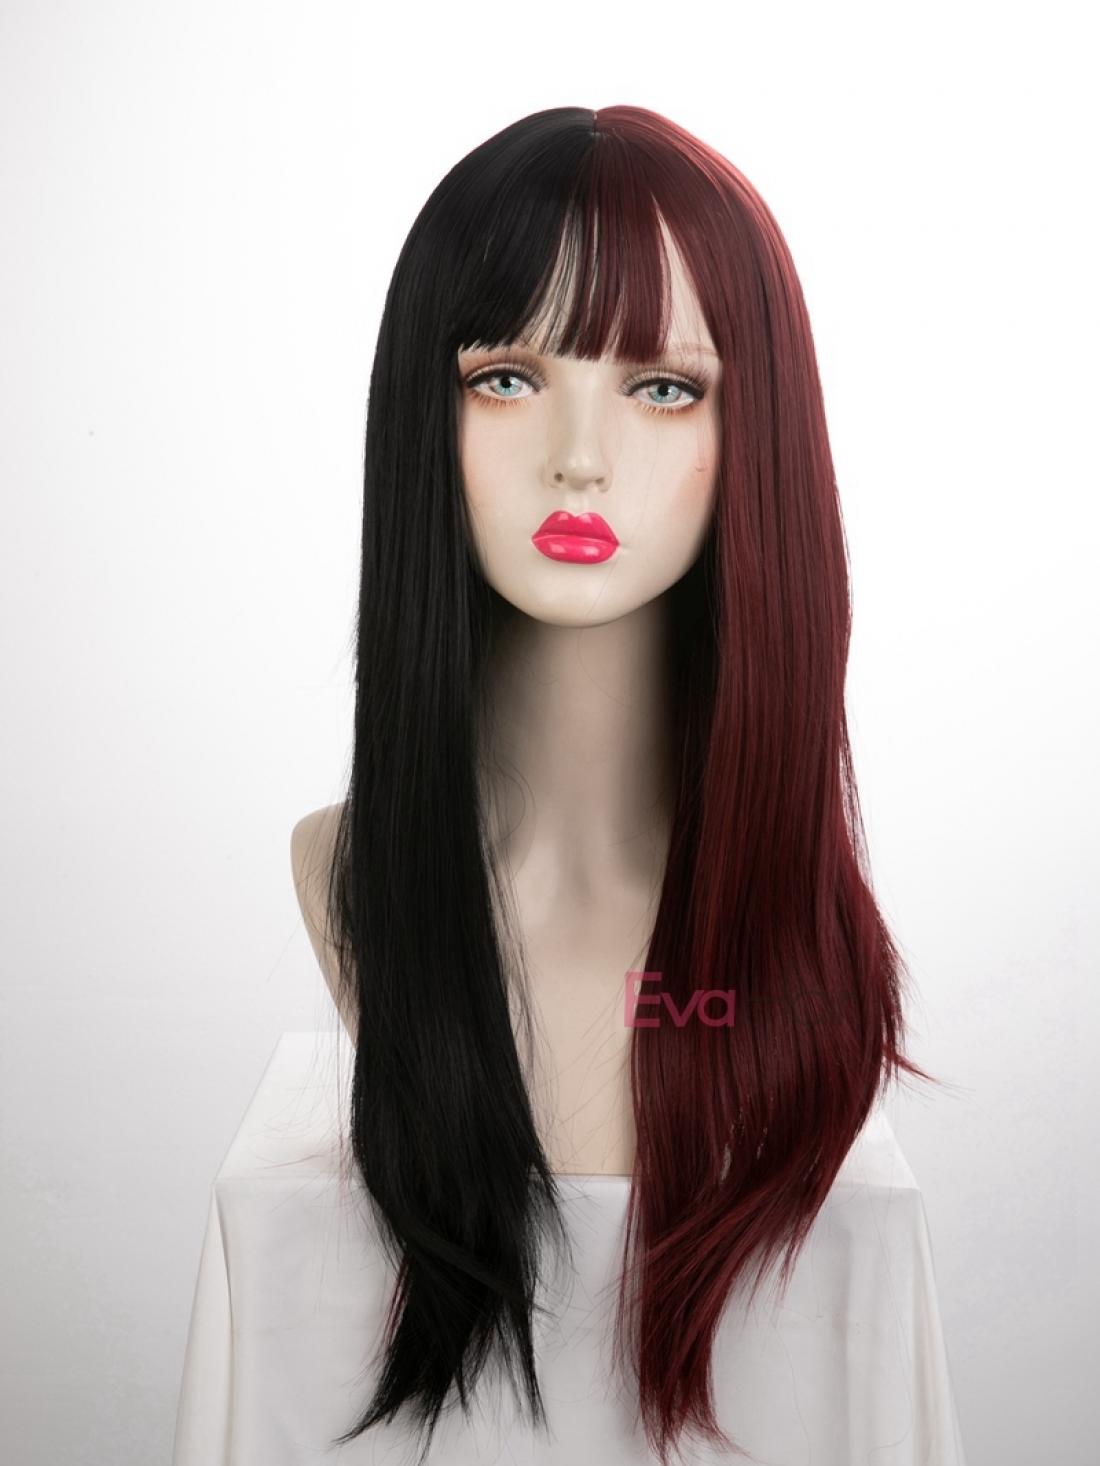 Evahair Half Black And Half Brown Wefted Cap Long Straight Synthetic Wig With Bangs Home Evahair